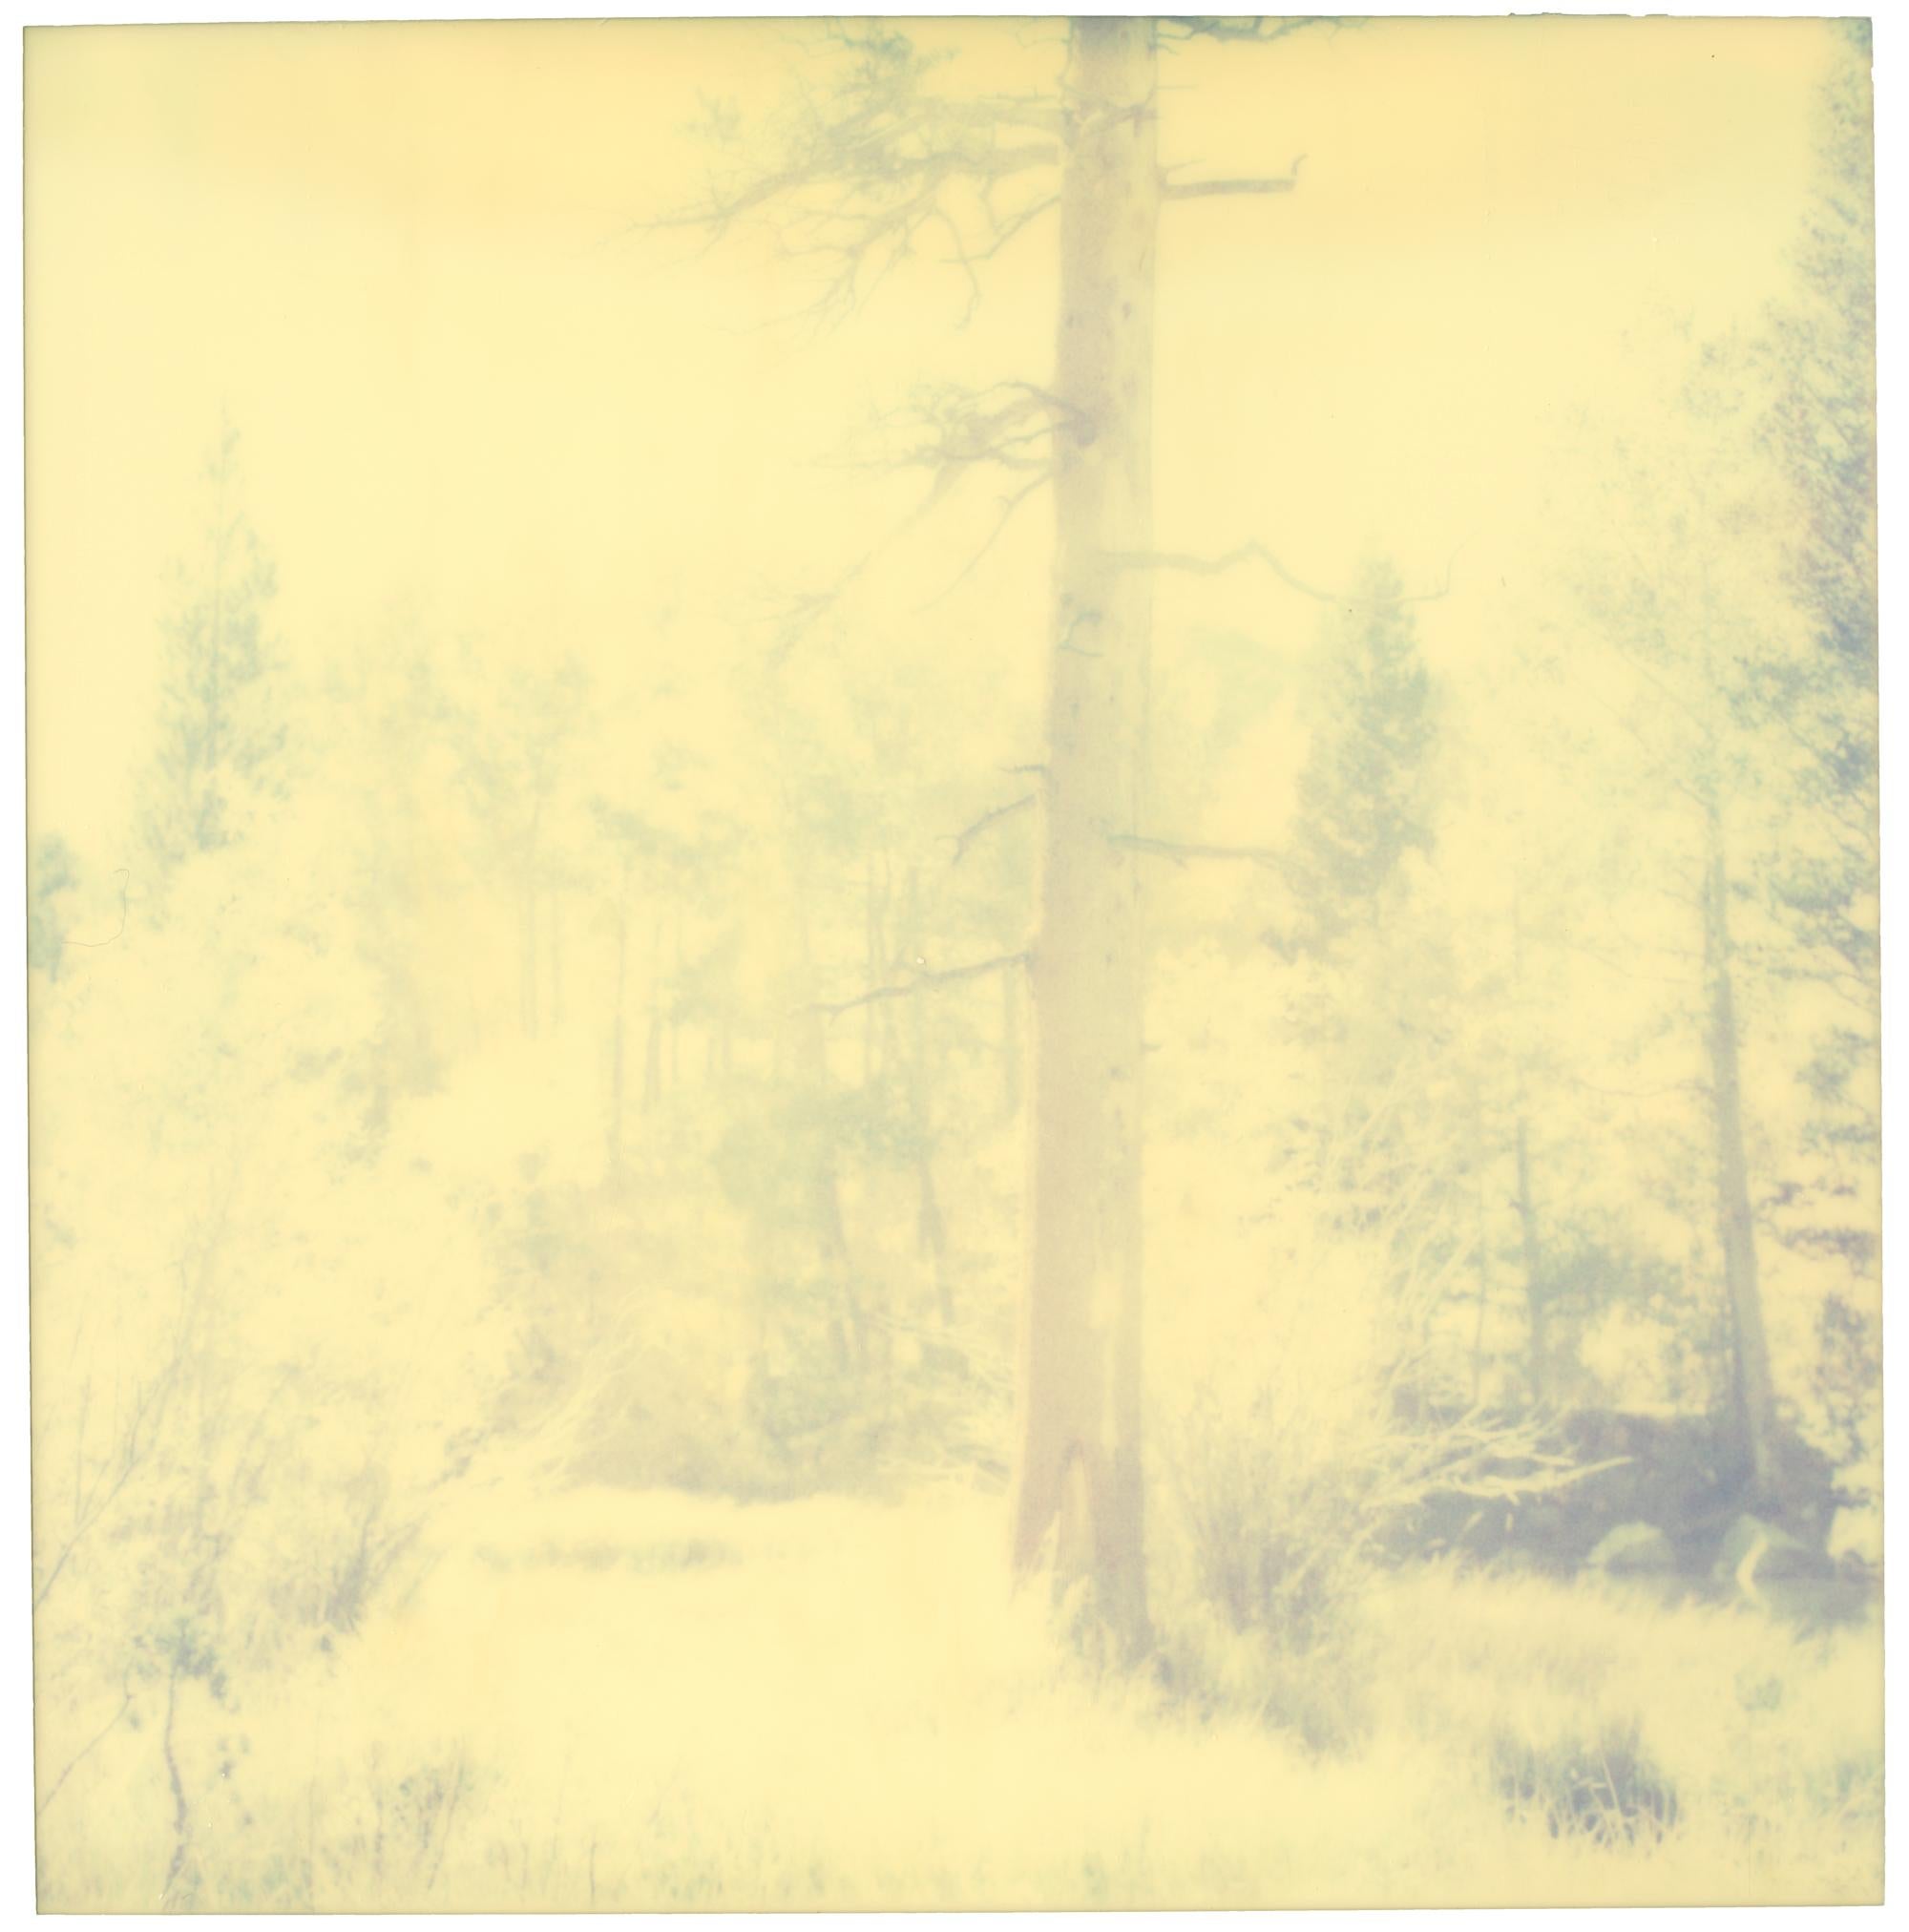 In the Range of Light III (Wastelands) - analog, Contemporary, Polaroid, Color 2